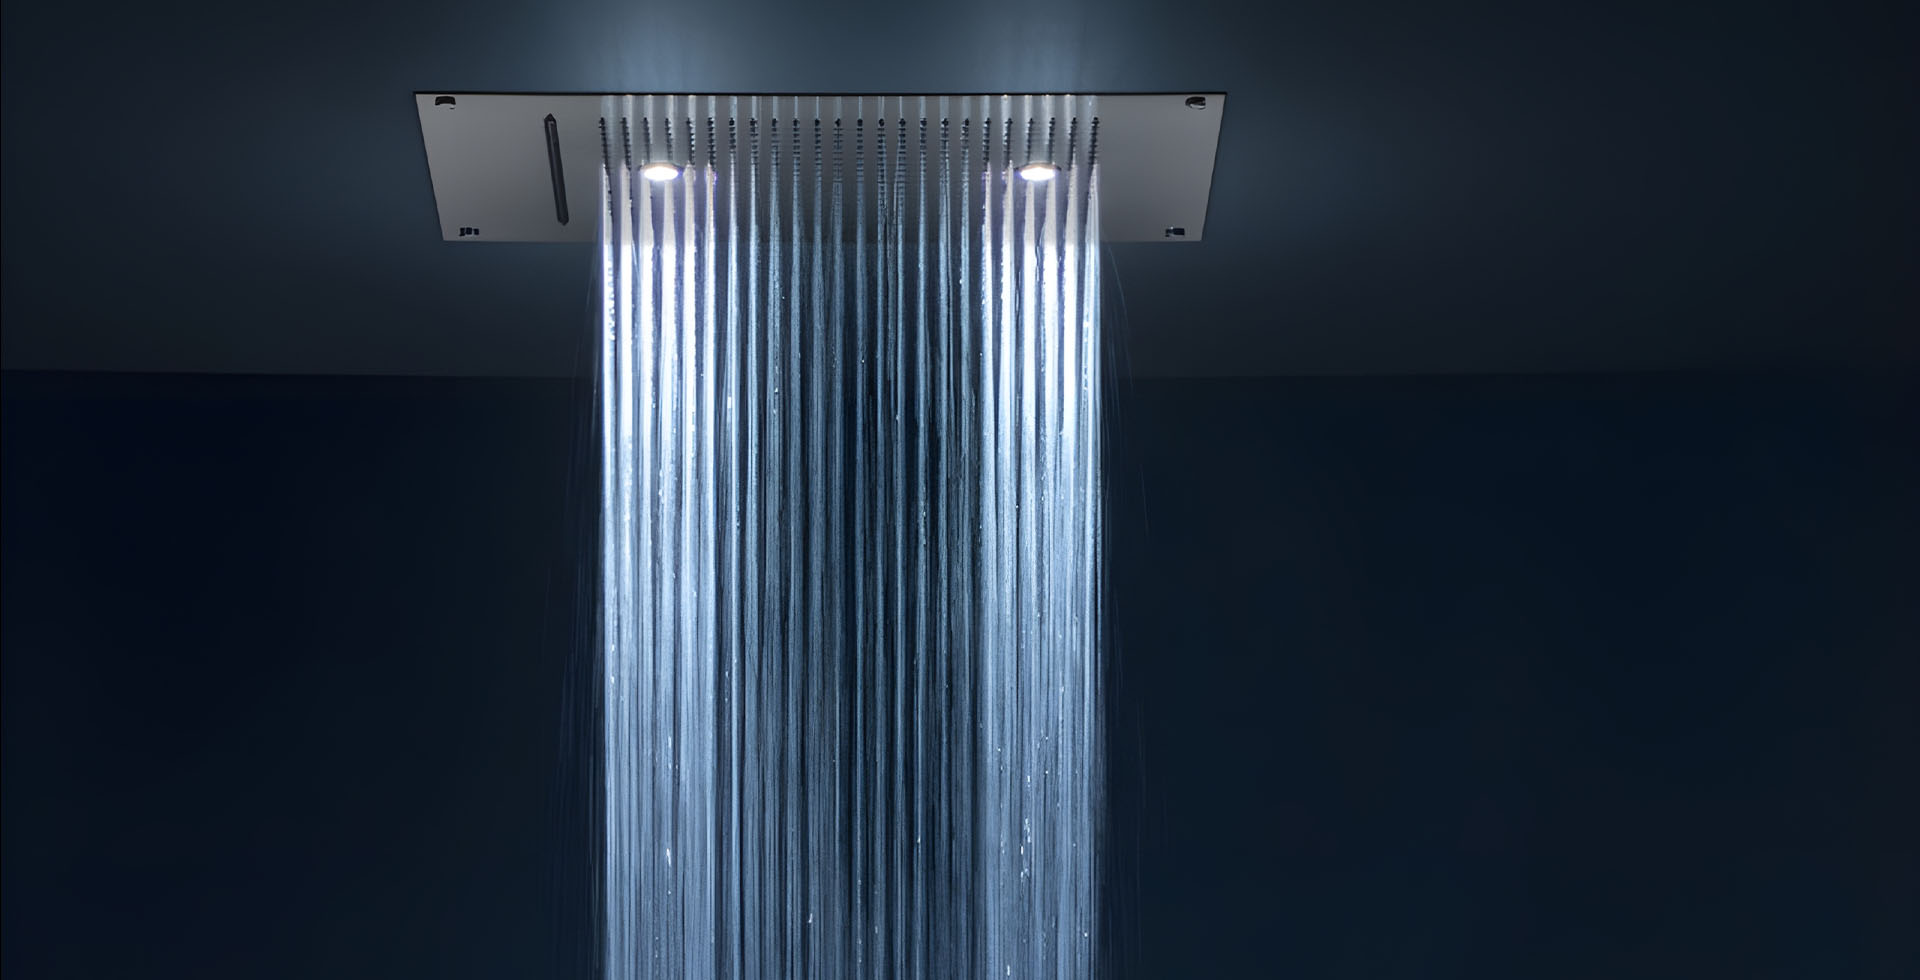 Köln's Shower Elegance - Elevate your routine with our unique shower system. Buy now for a perfect blend of sophisticated design and cost-effective luxury.